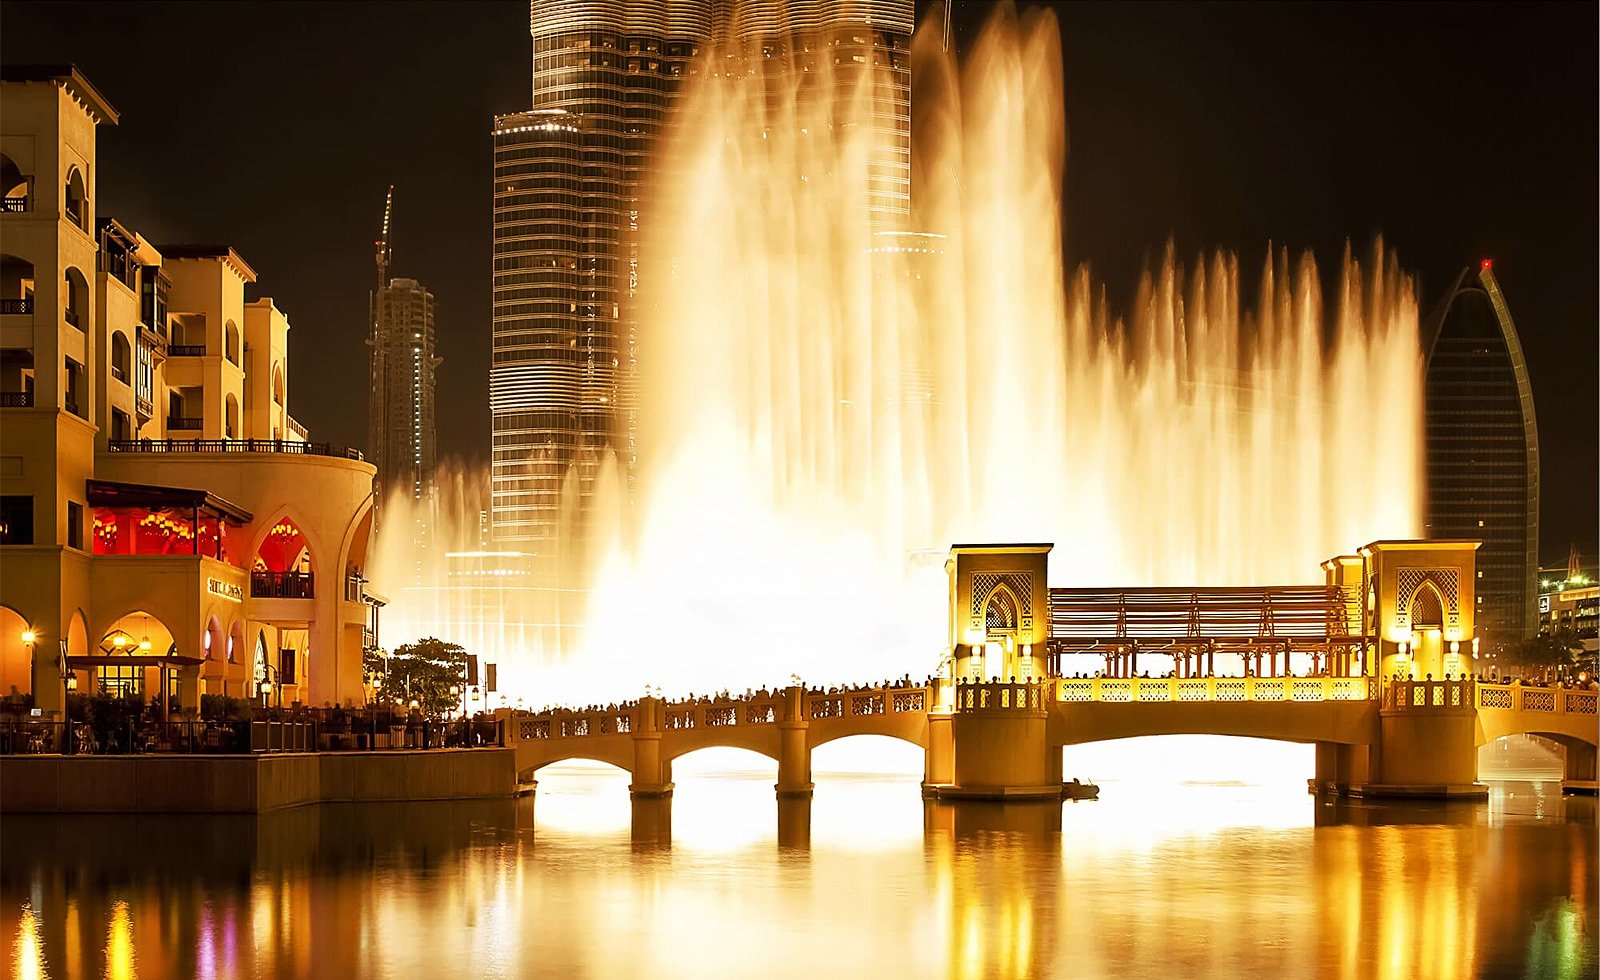 How to admire the singing fountain in Dubai